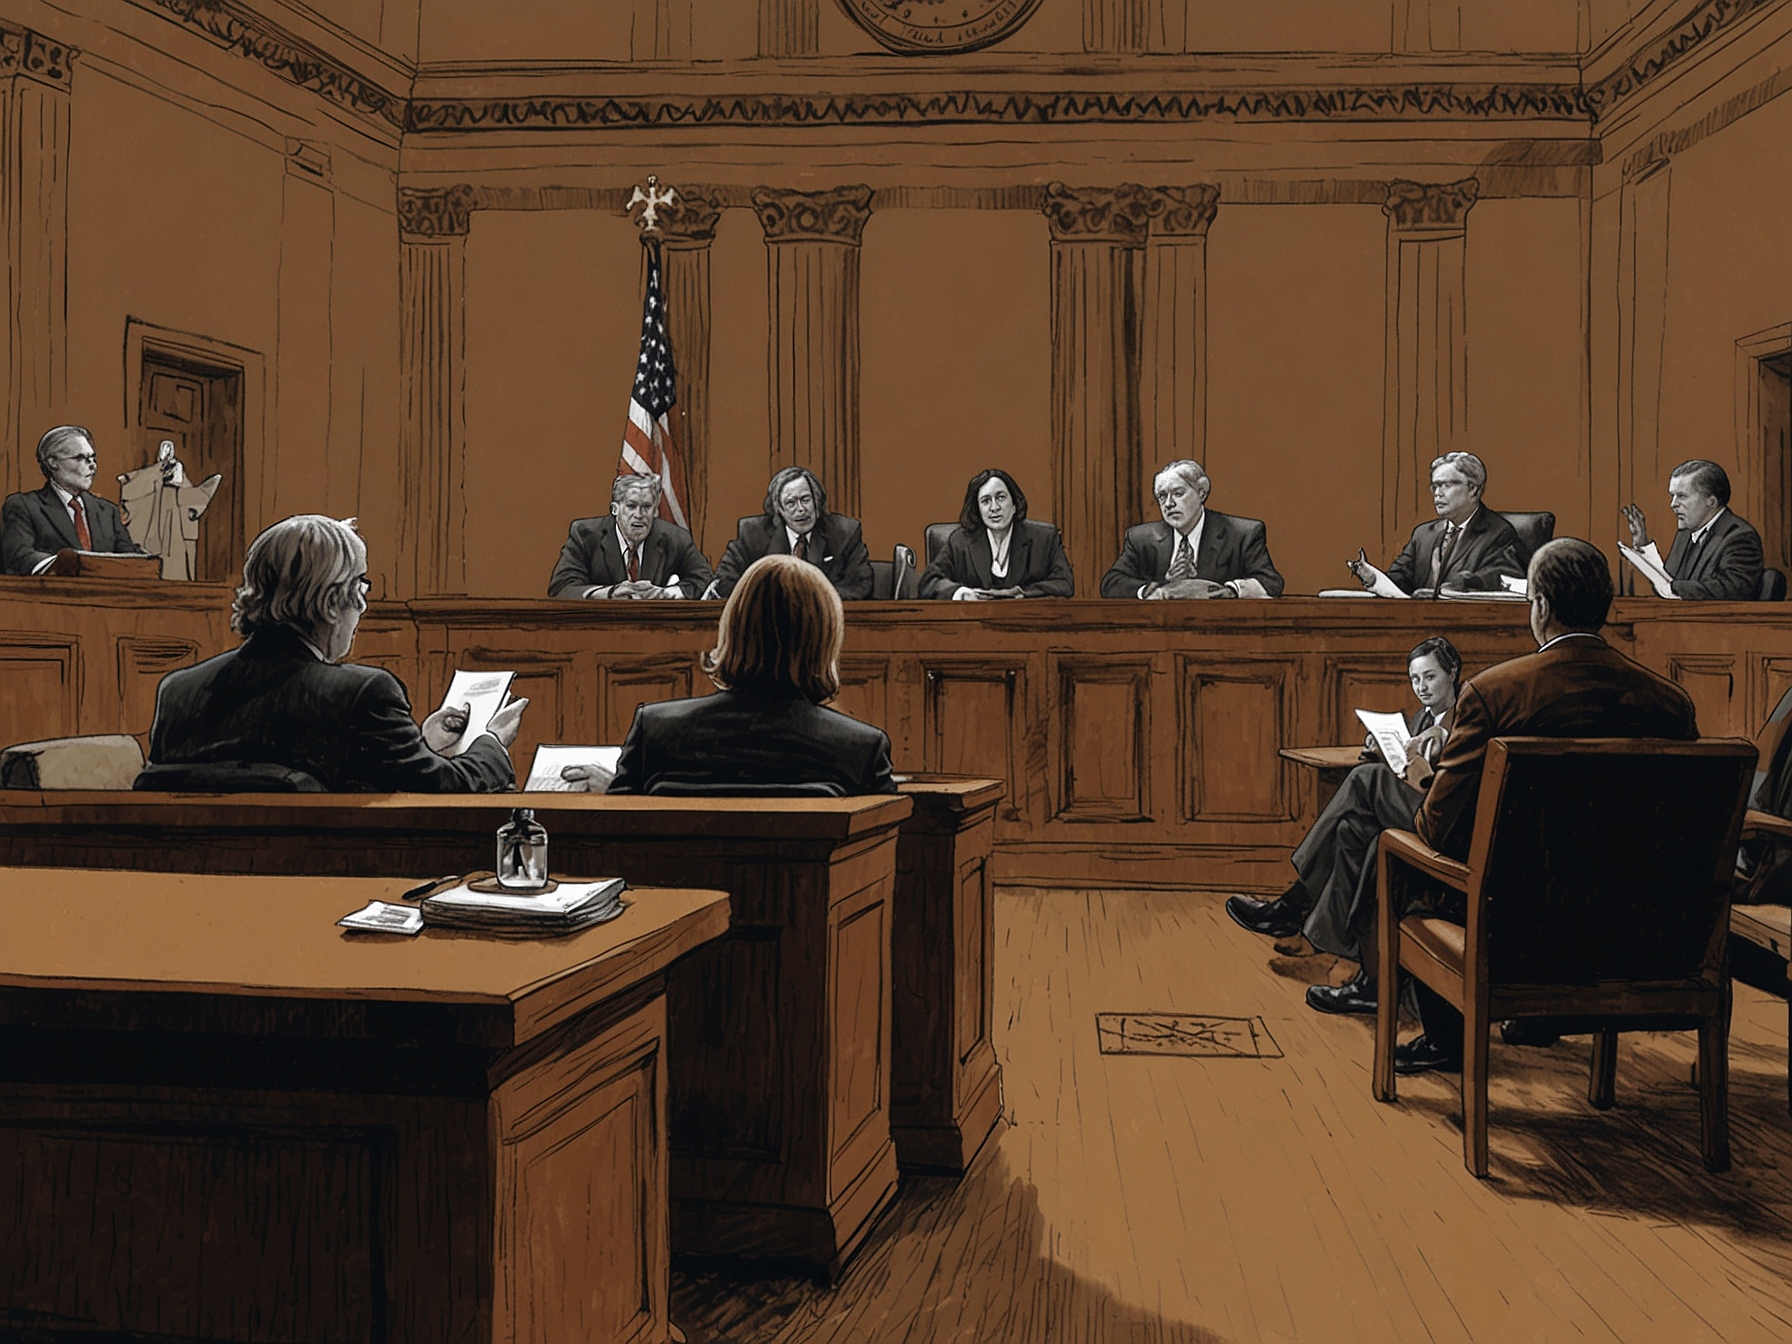 A courtroom scene showing the Supreme Court justices deliberating the public camping ban case, symbolizing the legal and societal complexities surrounding homelessness in the United States.